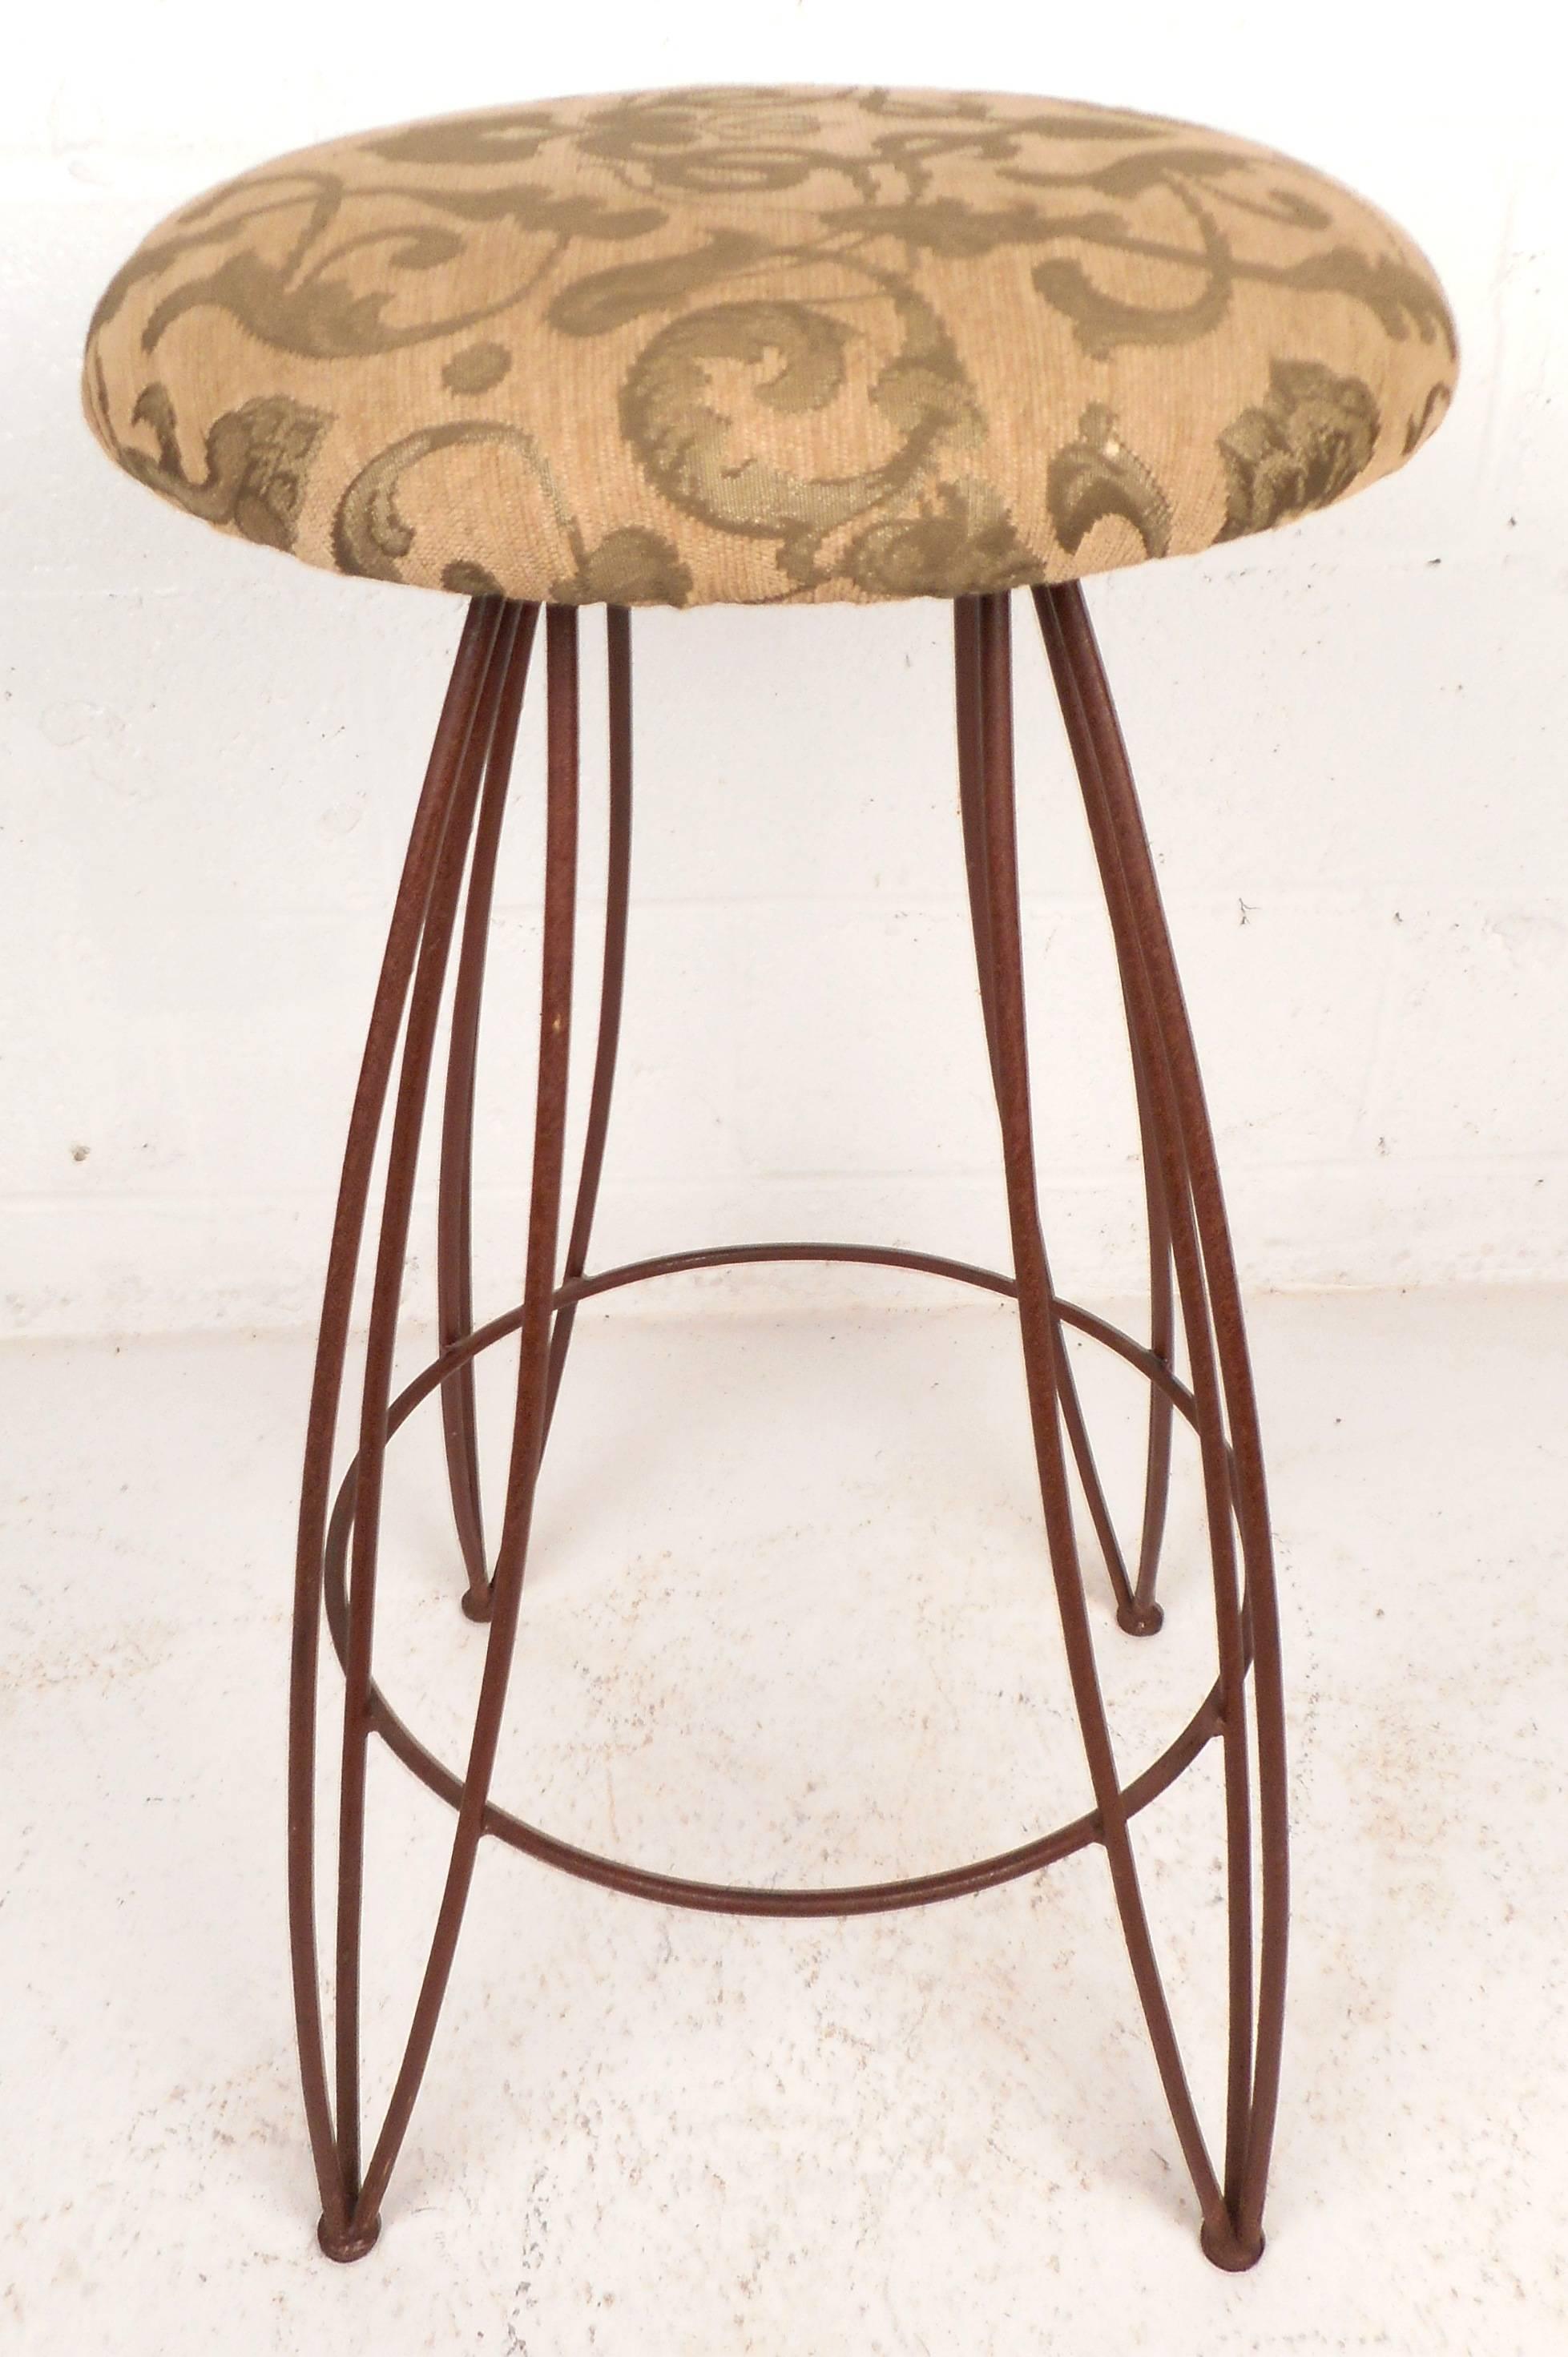 Beautiful set of three vintage modern bar stools feature a comfortable round upholstered seat on top of a sturdy wrought iron base. The unique three prong style hairpin legs and gorgeous design on the fabric add style and grace to any modern